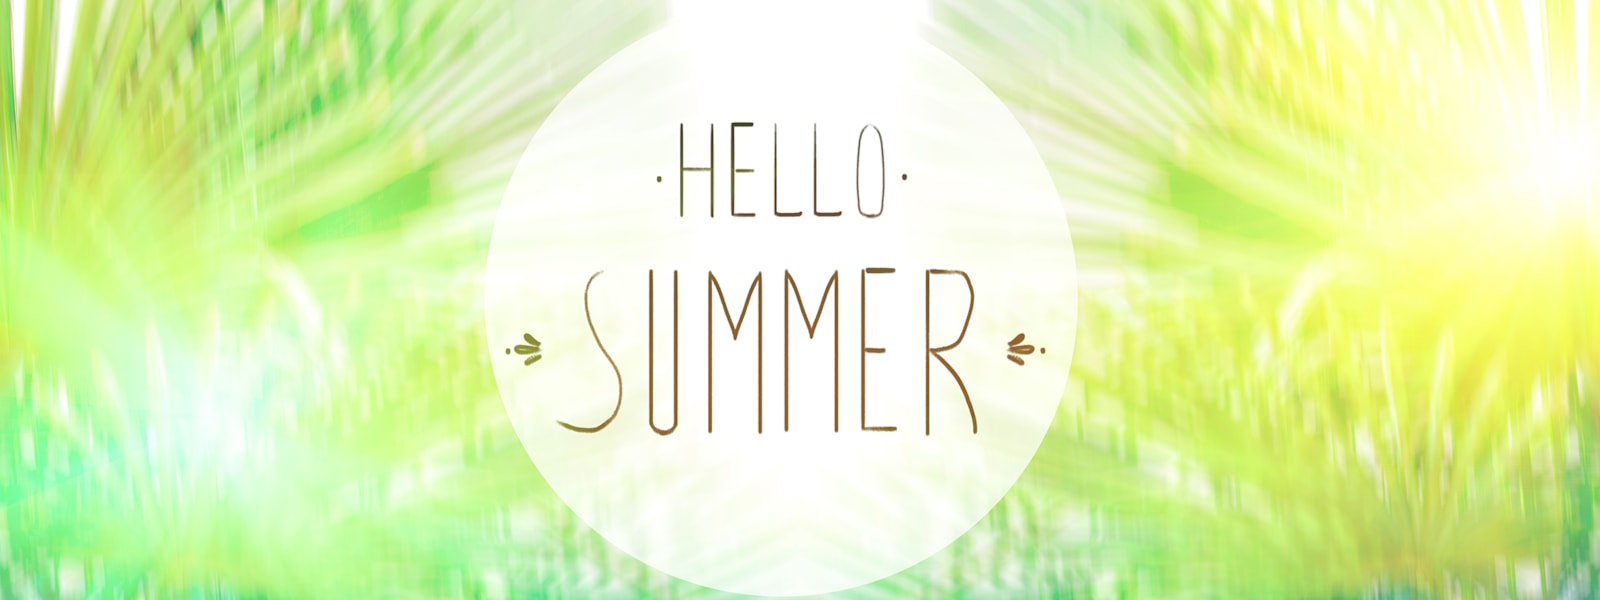 Hello Summer on a green and yellow background